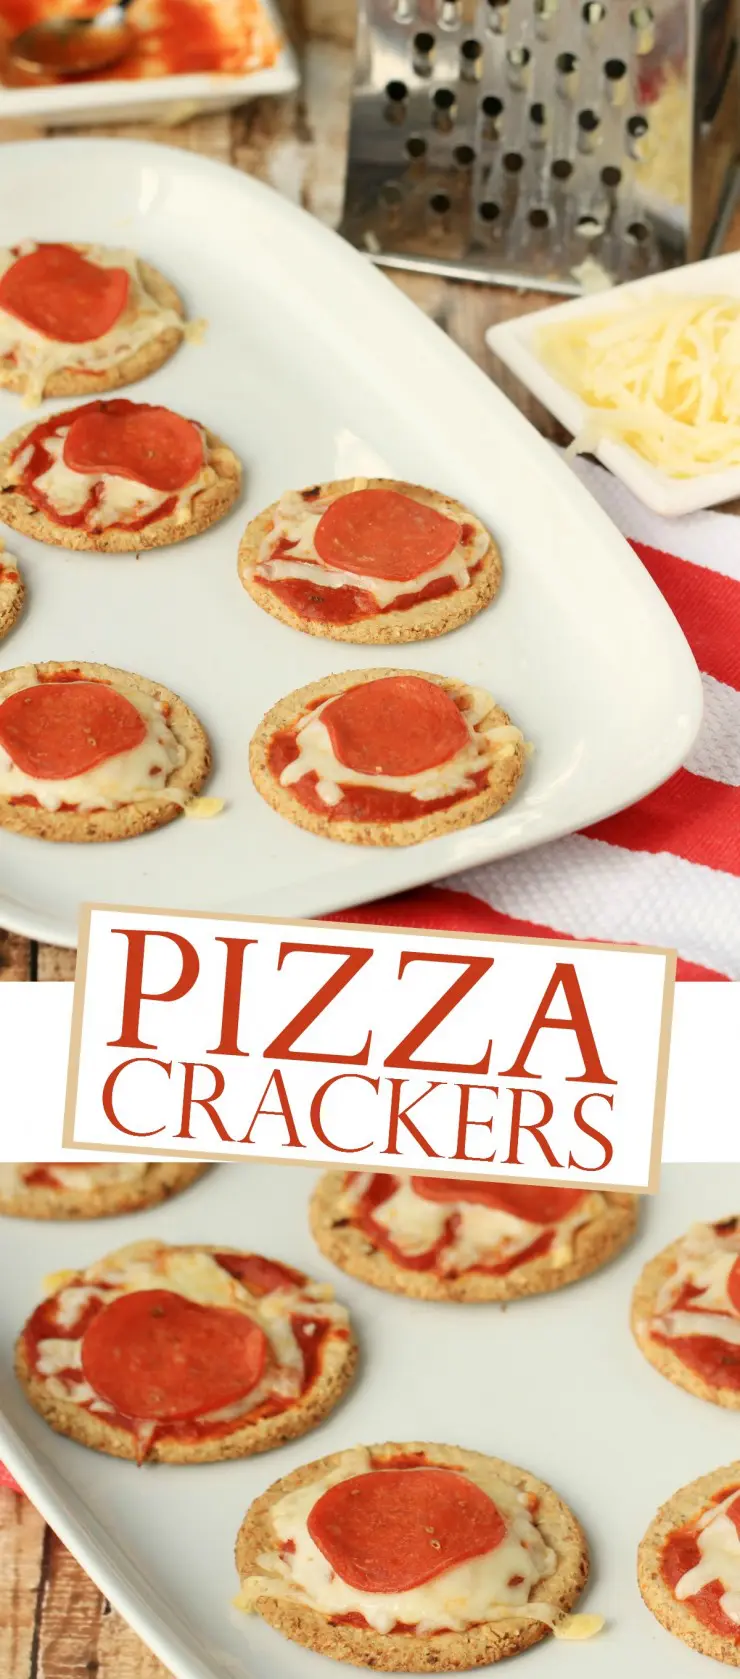 Cracker Pizzas made with Nairn’s Oat Crackers are an easy after school snack!